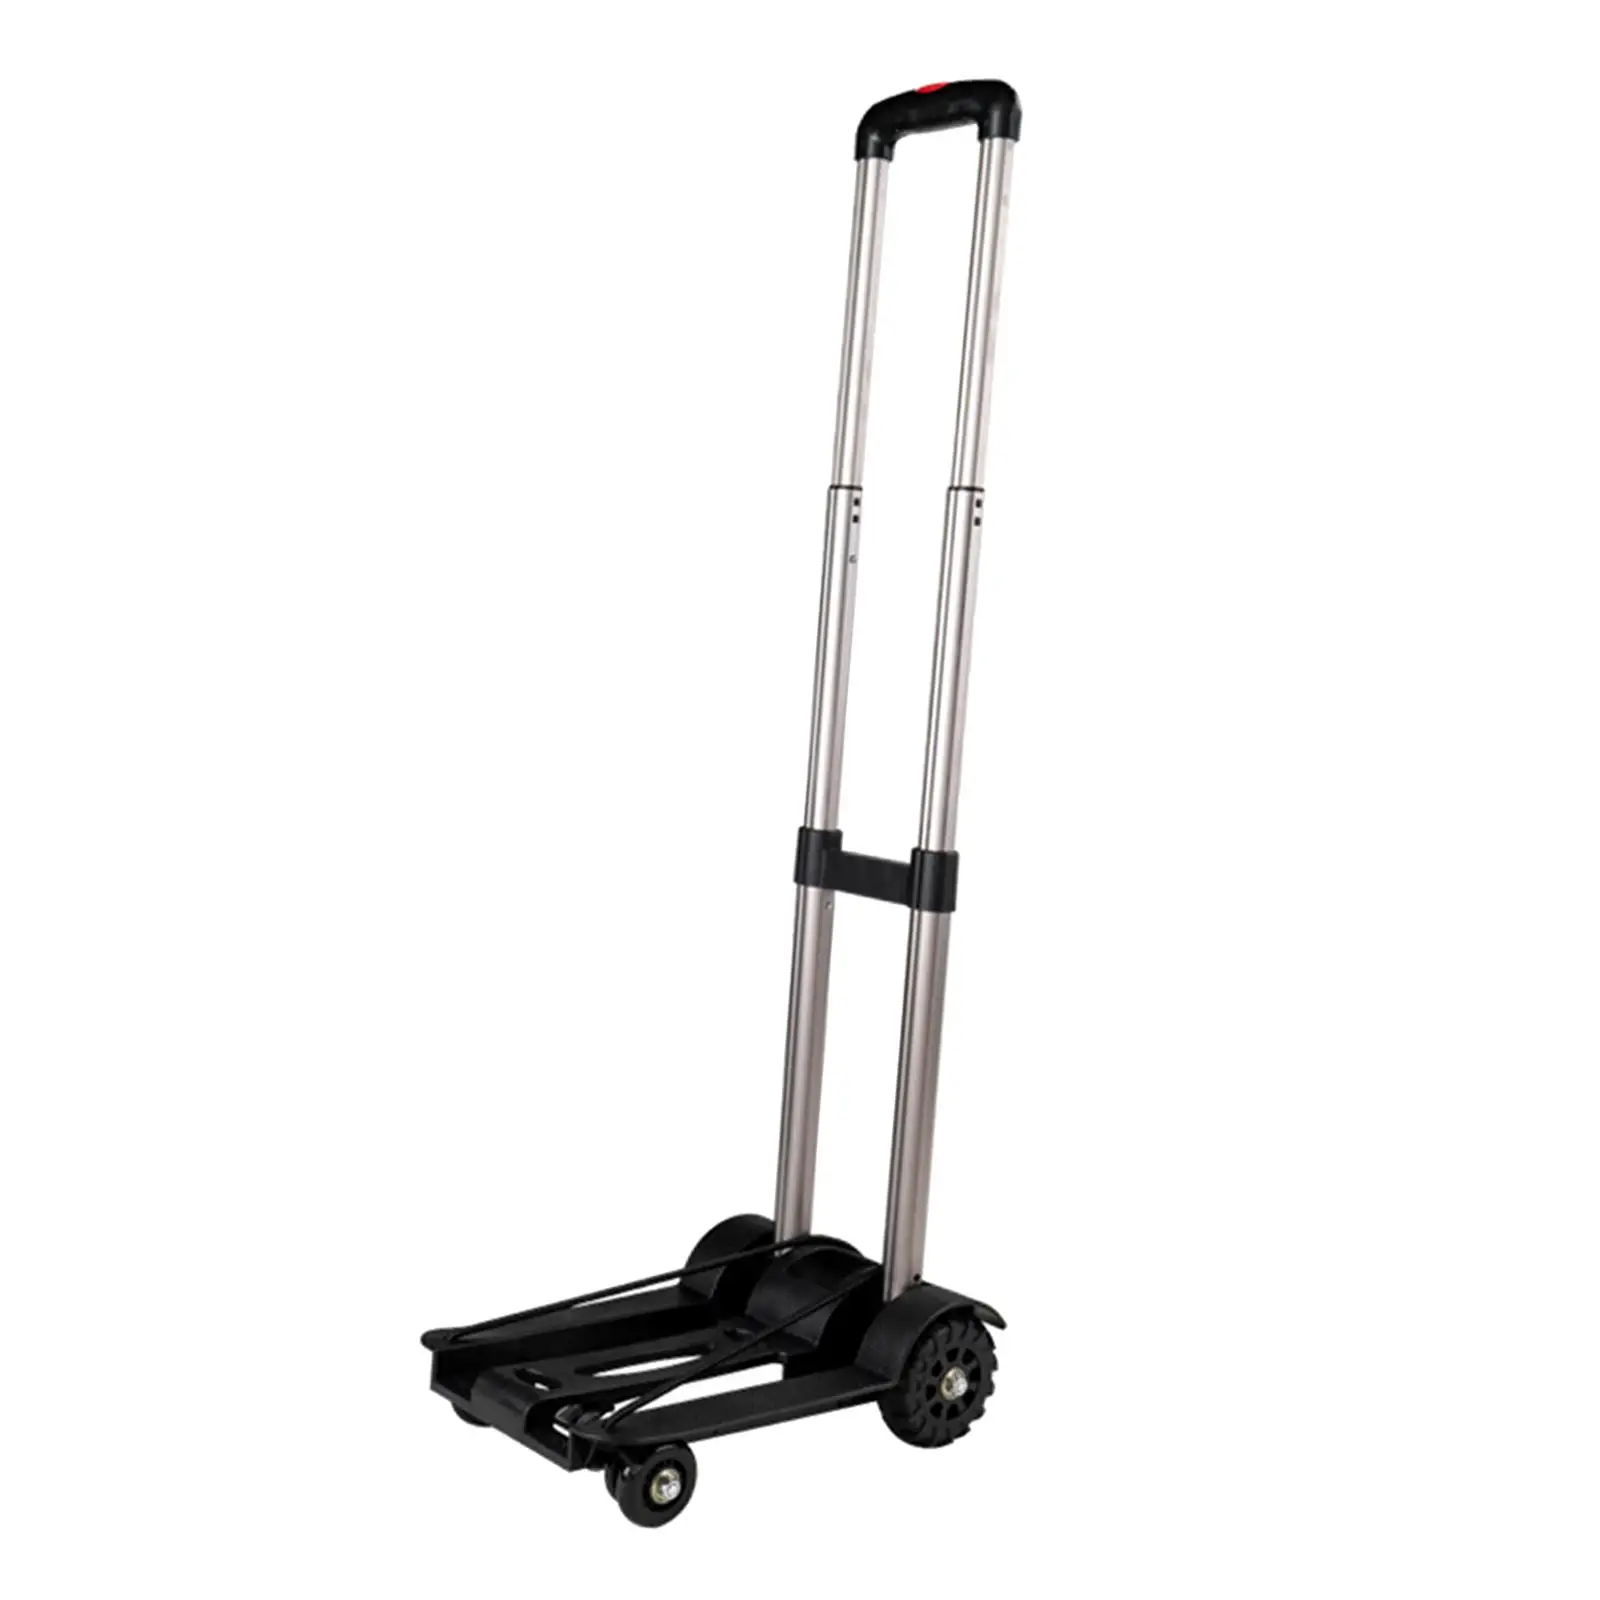 Folding Hand Truck Folding Hand Cart 40kg Load Capacity Furniture Wheel Trolley for Travel Shopping Moving